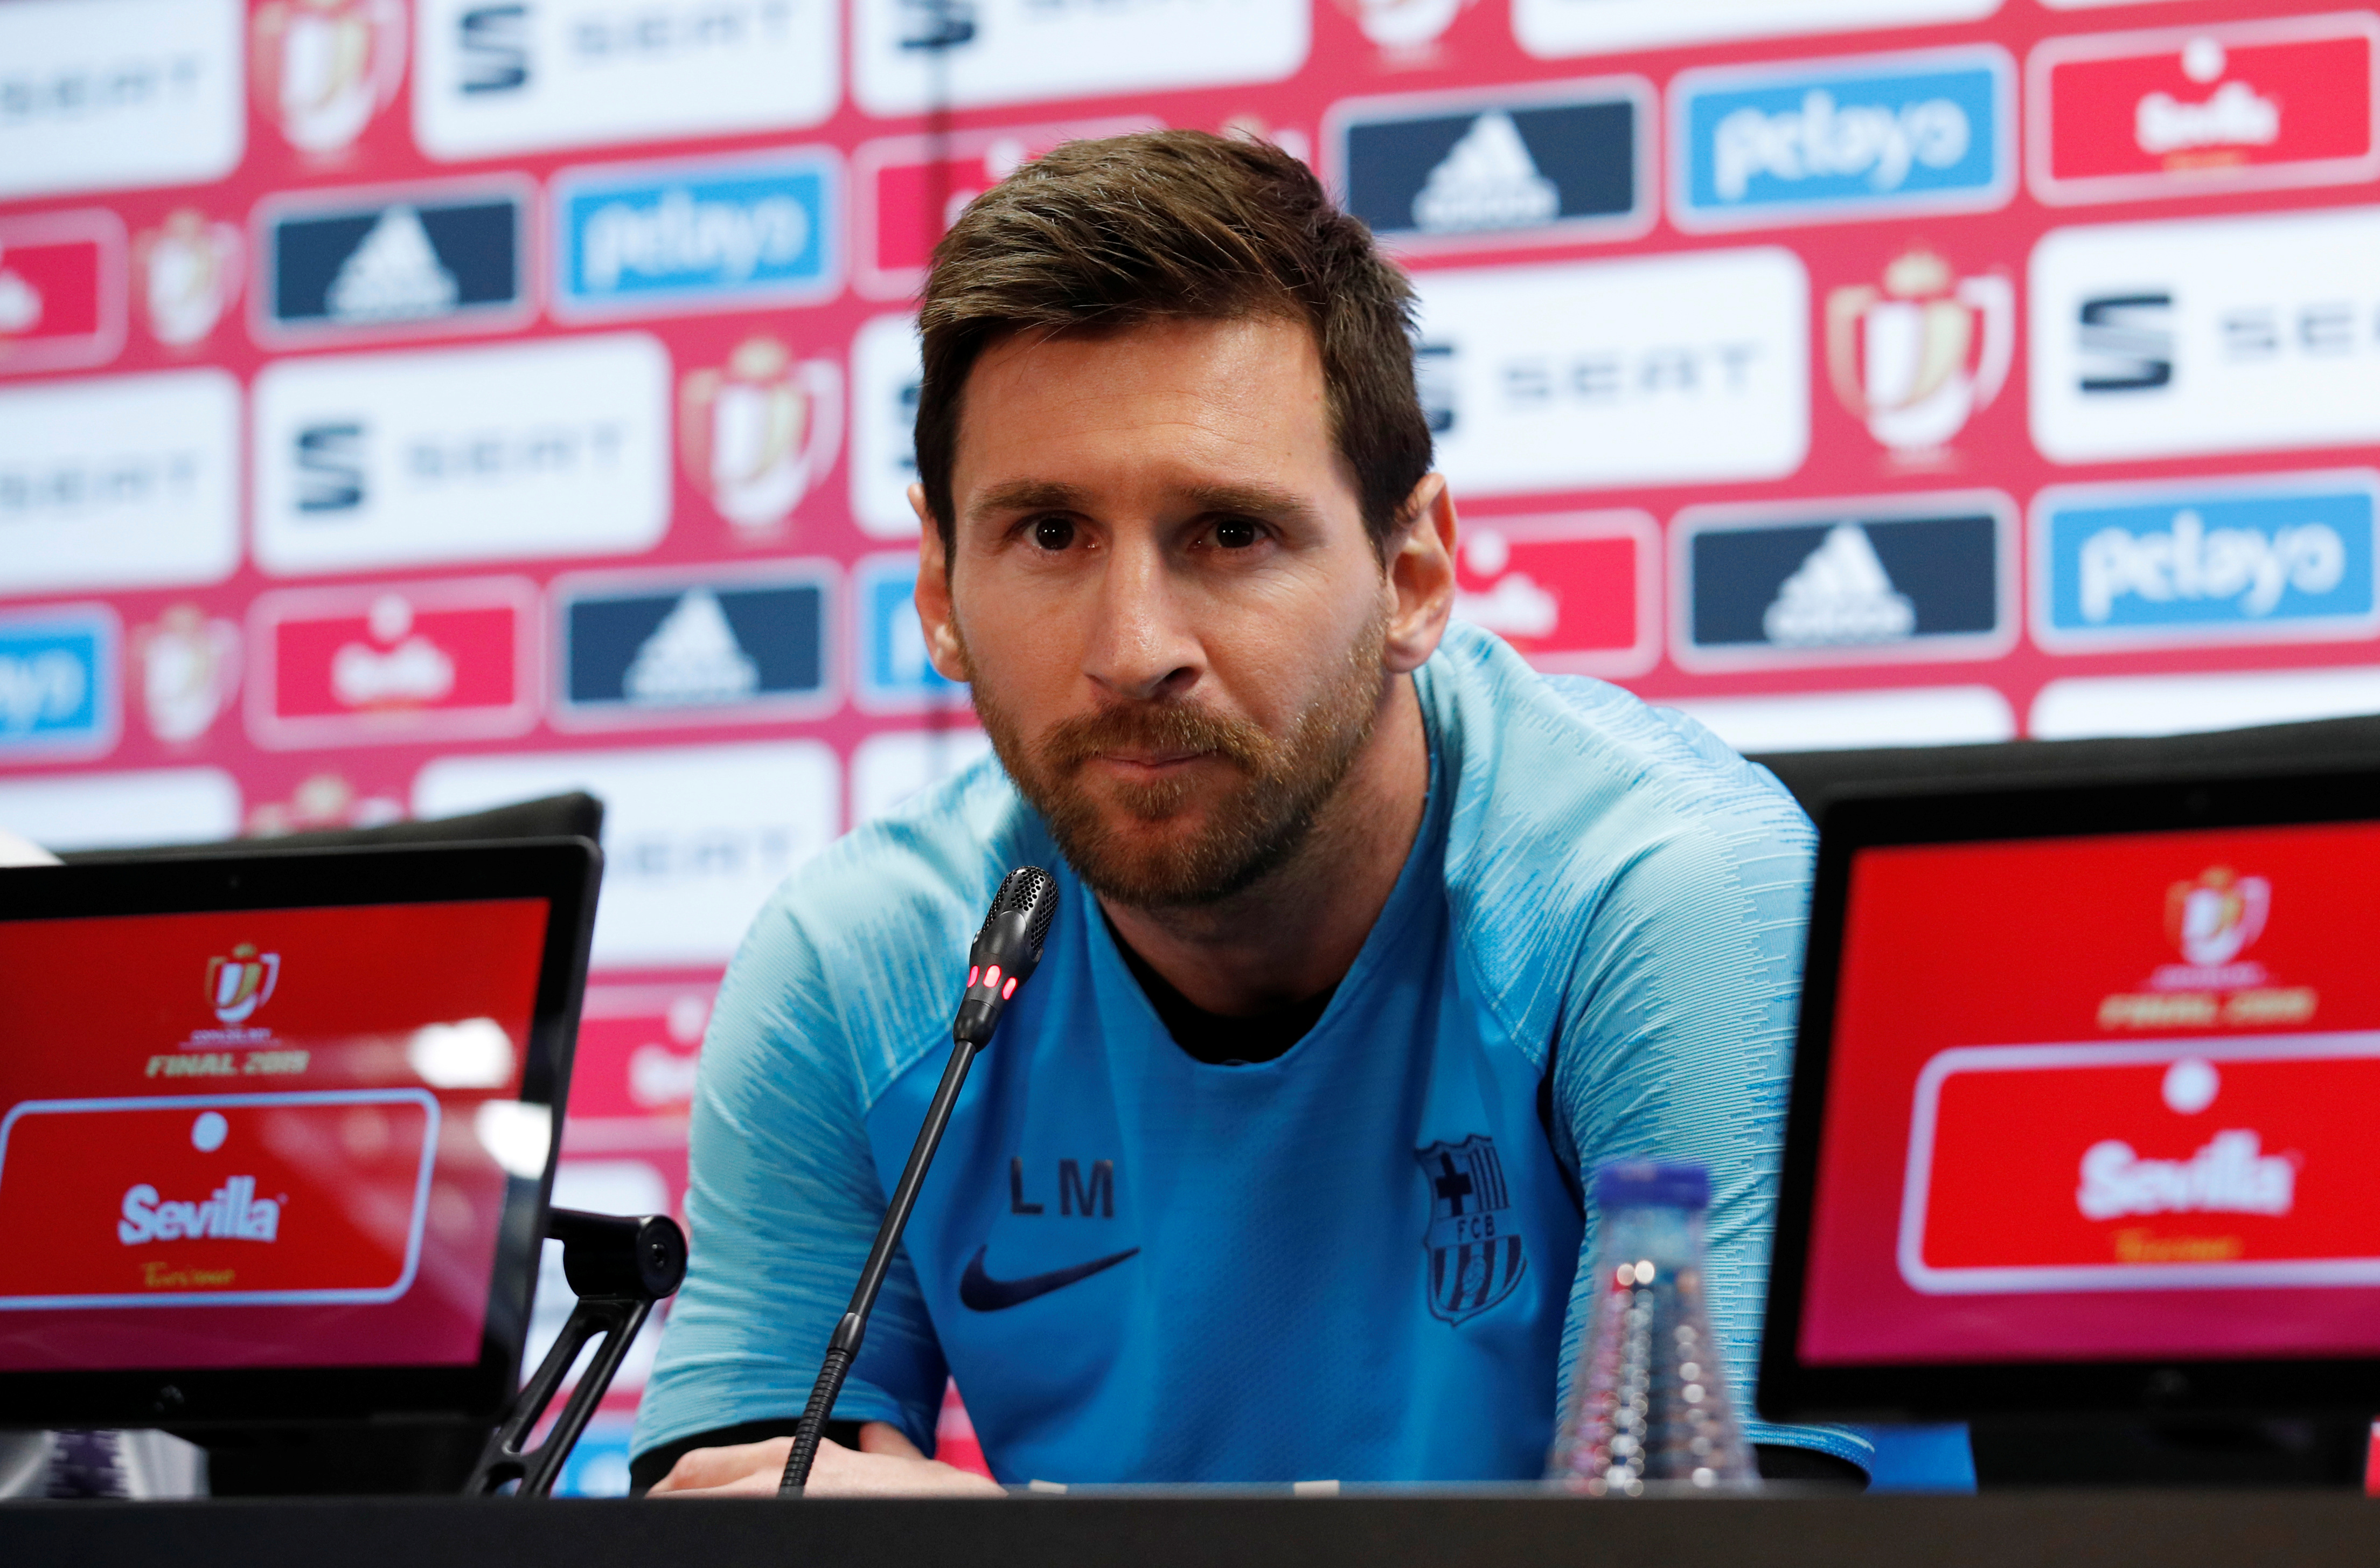 Transfer Update: Messi to give press conference at Camp Nou on Sunday!